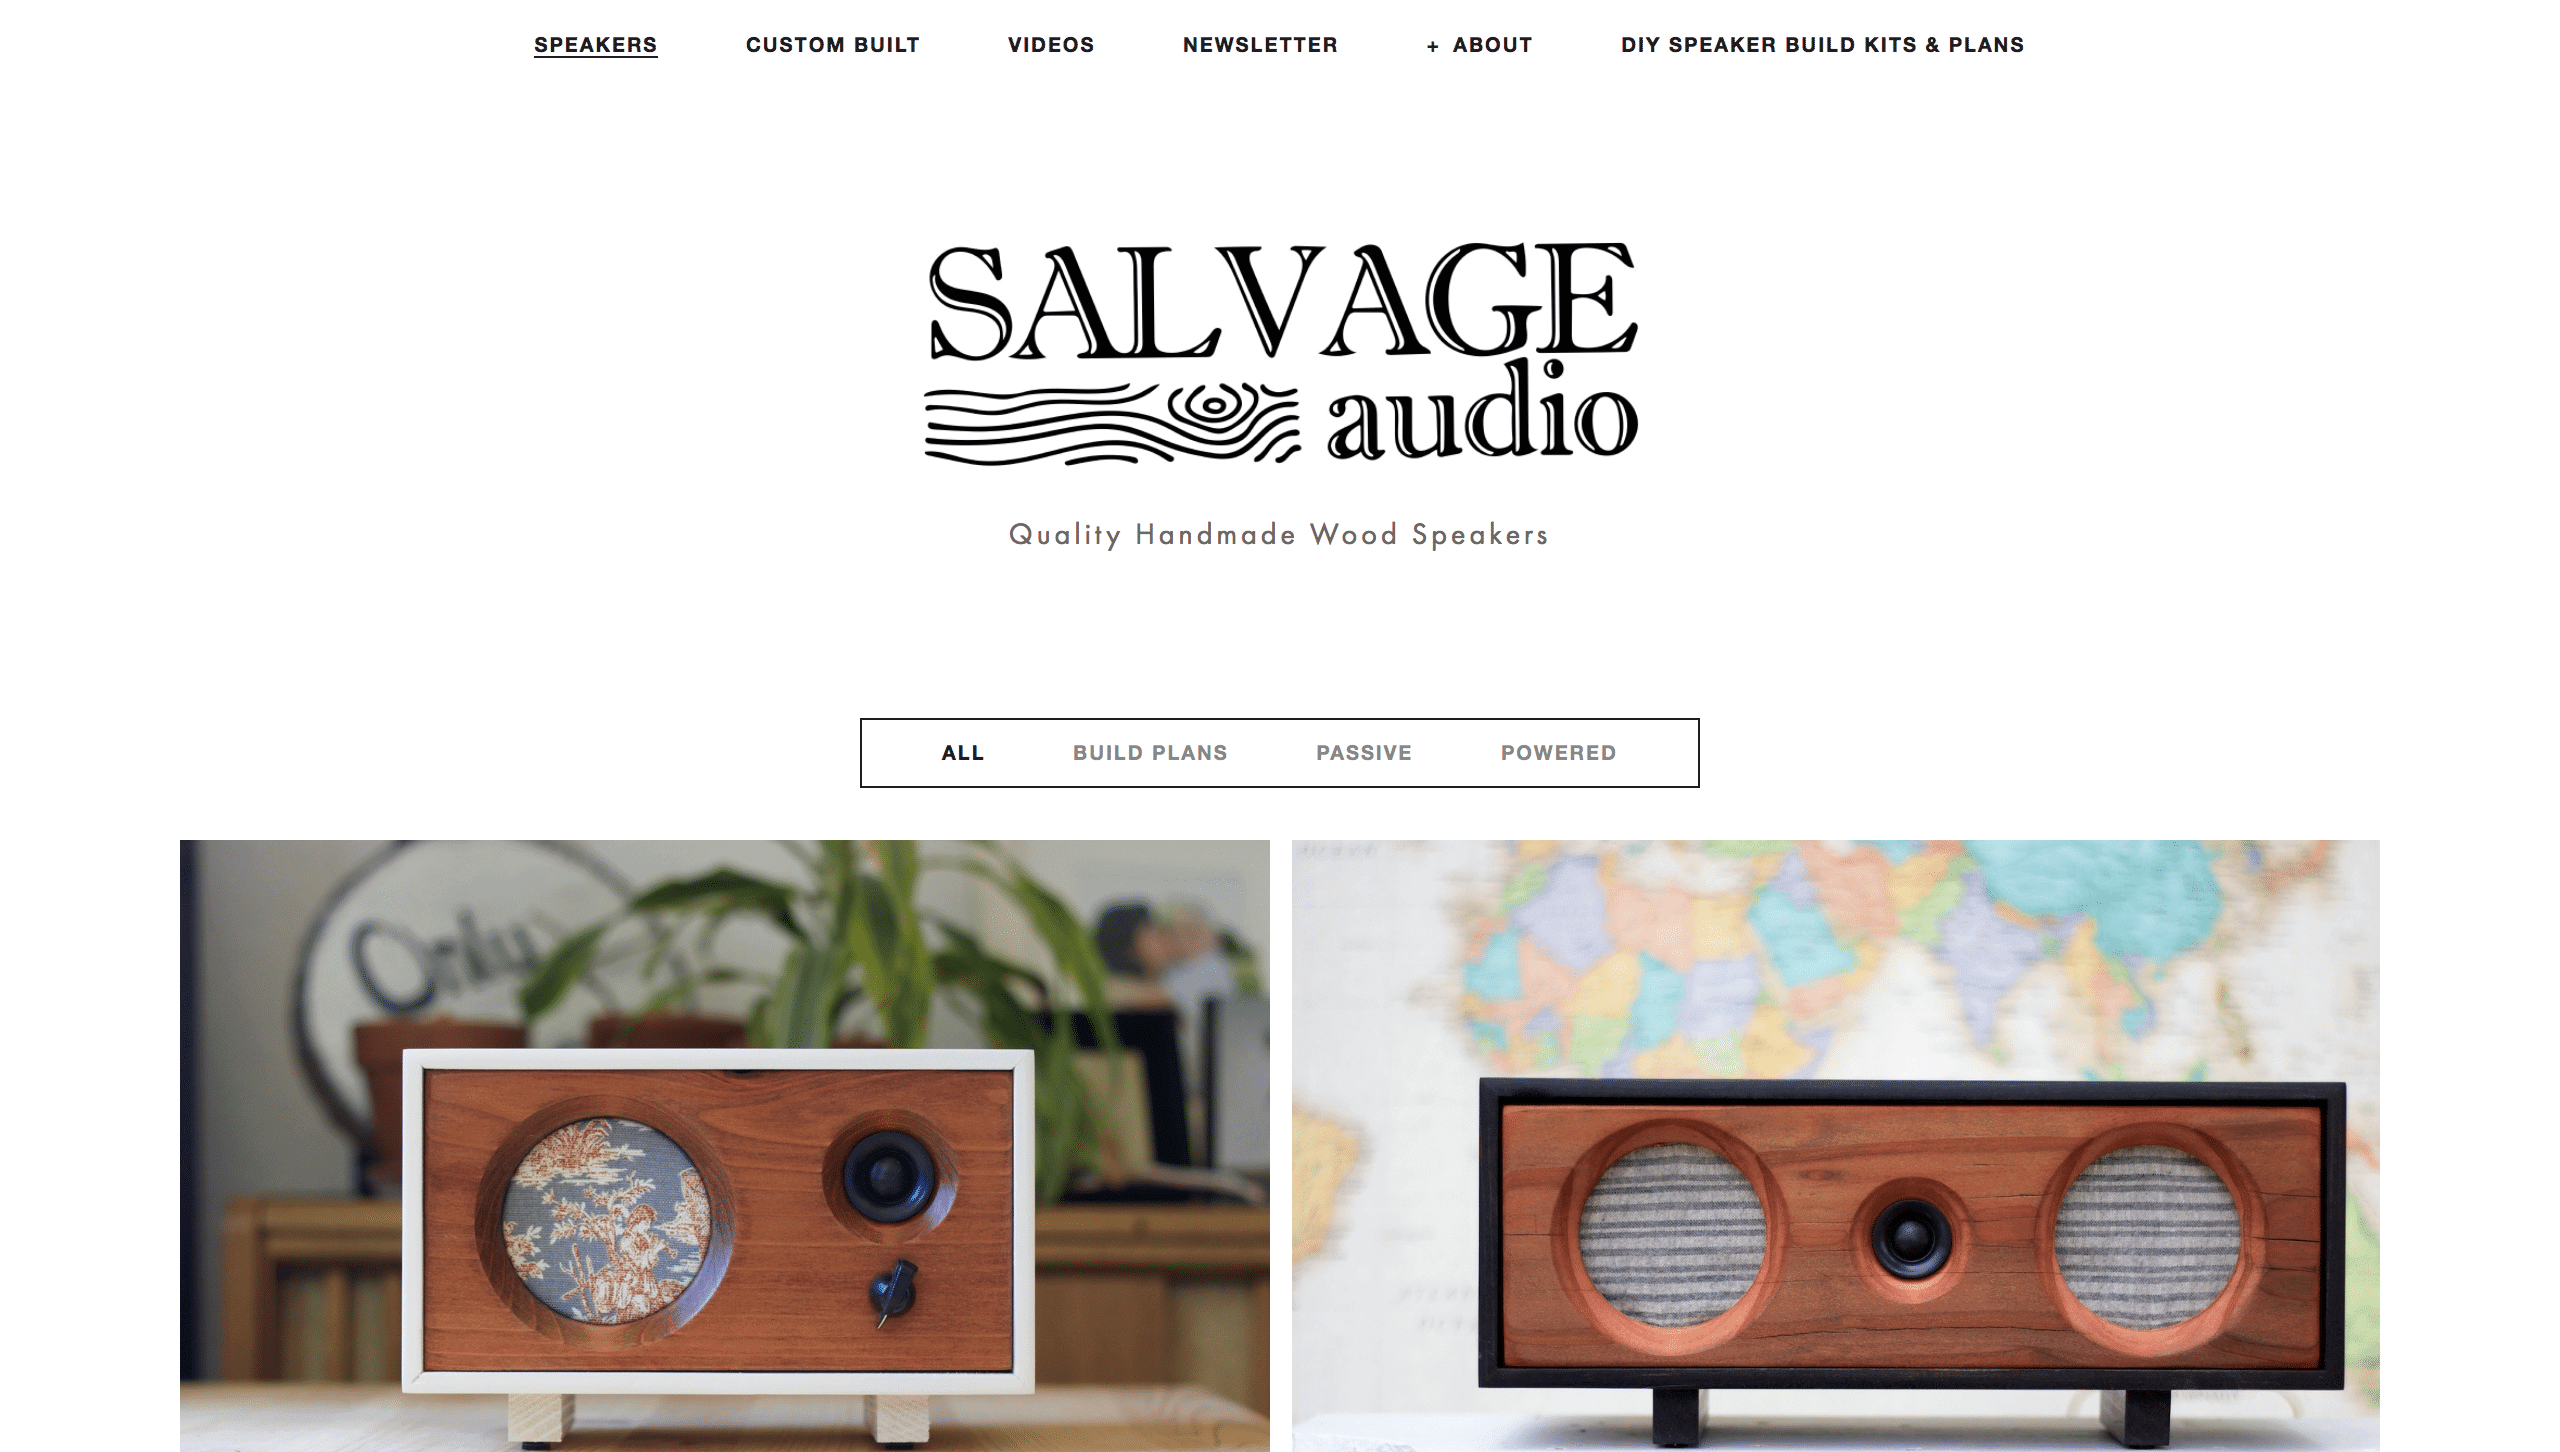 Home page for Salvage Audio, a refurbished wooden speaker website